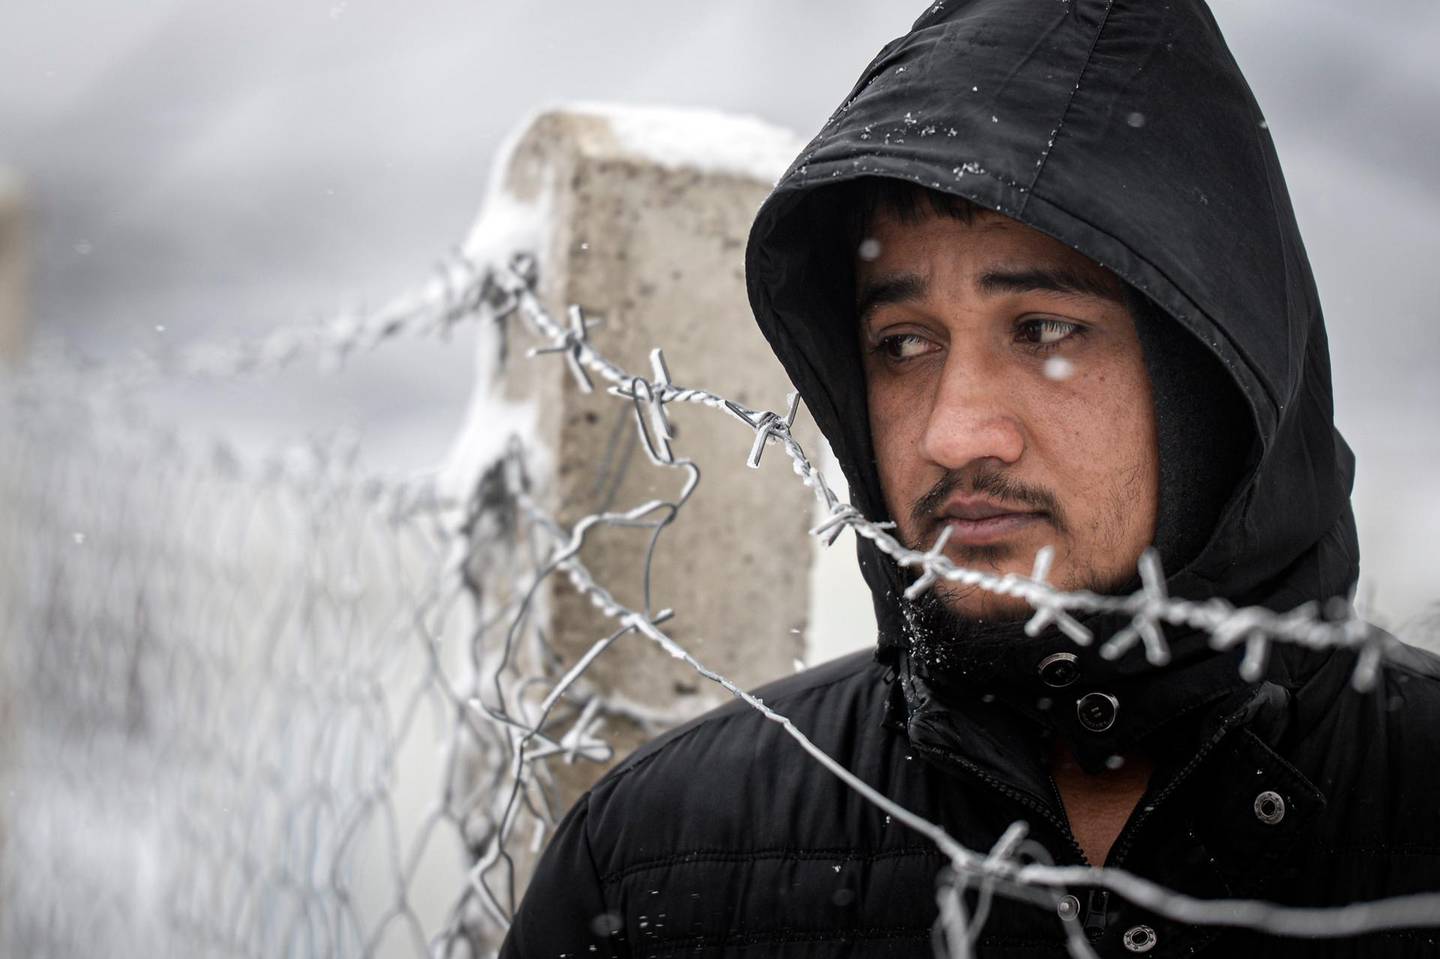 A migrant stands next to a fence during snowfall at the Lipa camp, outside Bihac, Bosnia, Friday, Jan. 8, 2021. A fresh spate of snowy and very cold winter weather on has brought more misery for hundreds of migrants who have been stuck for days in a burnt out camp in northwest Bosnia waiting for heating and other facilities. (AP Photo/Kemal Softic)